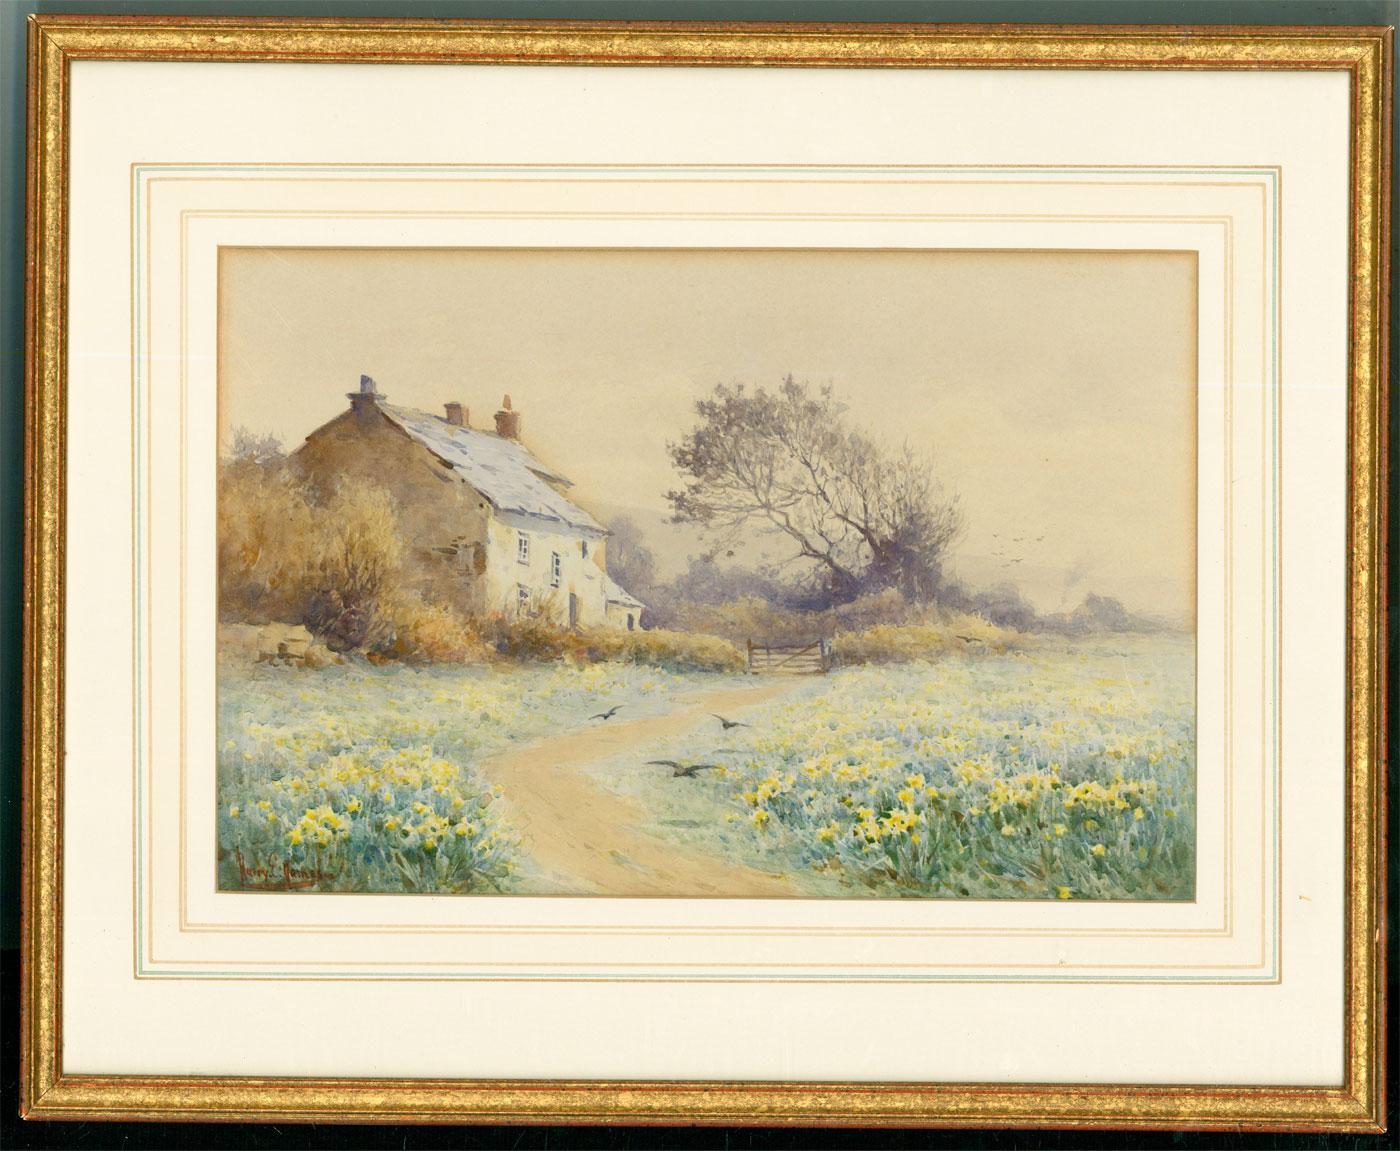 A very fine watercolour by the British artist Harry E. James (c.1870-c.1920). The scene depict a beautiful Cornish farm house set back from a field of spring daffodil. Well-presented in an elegant gilt-effect frame with a wash-line mount. Signed to